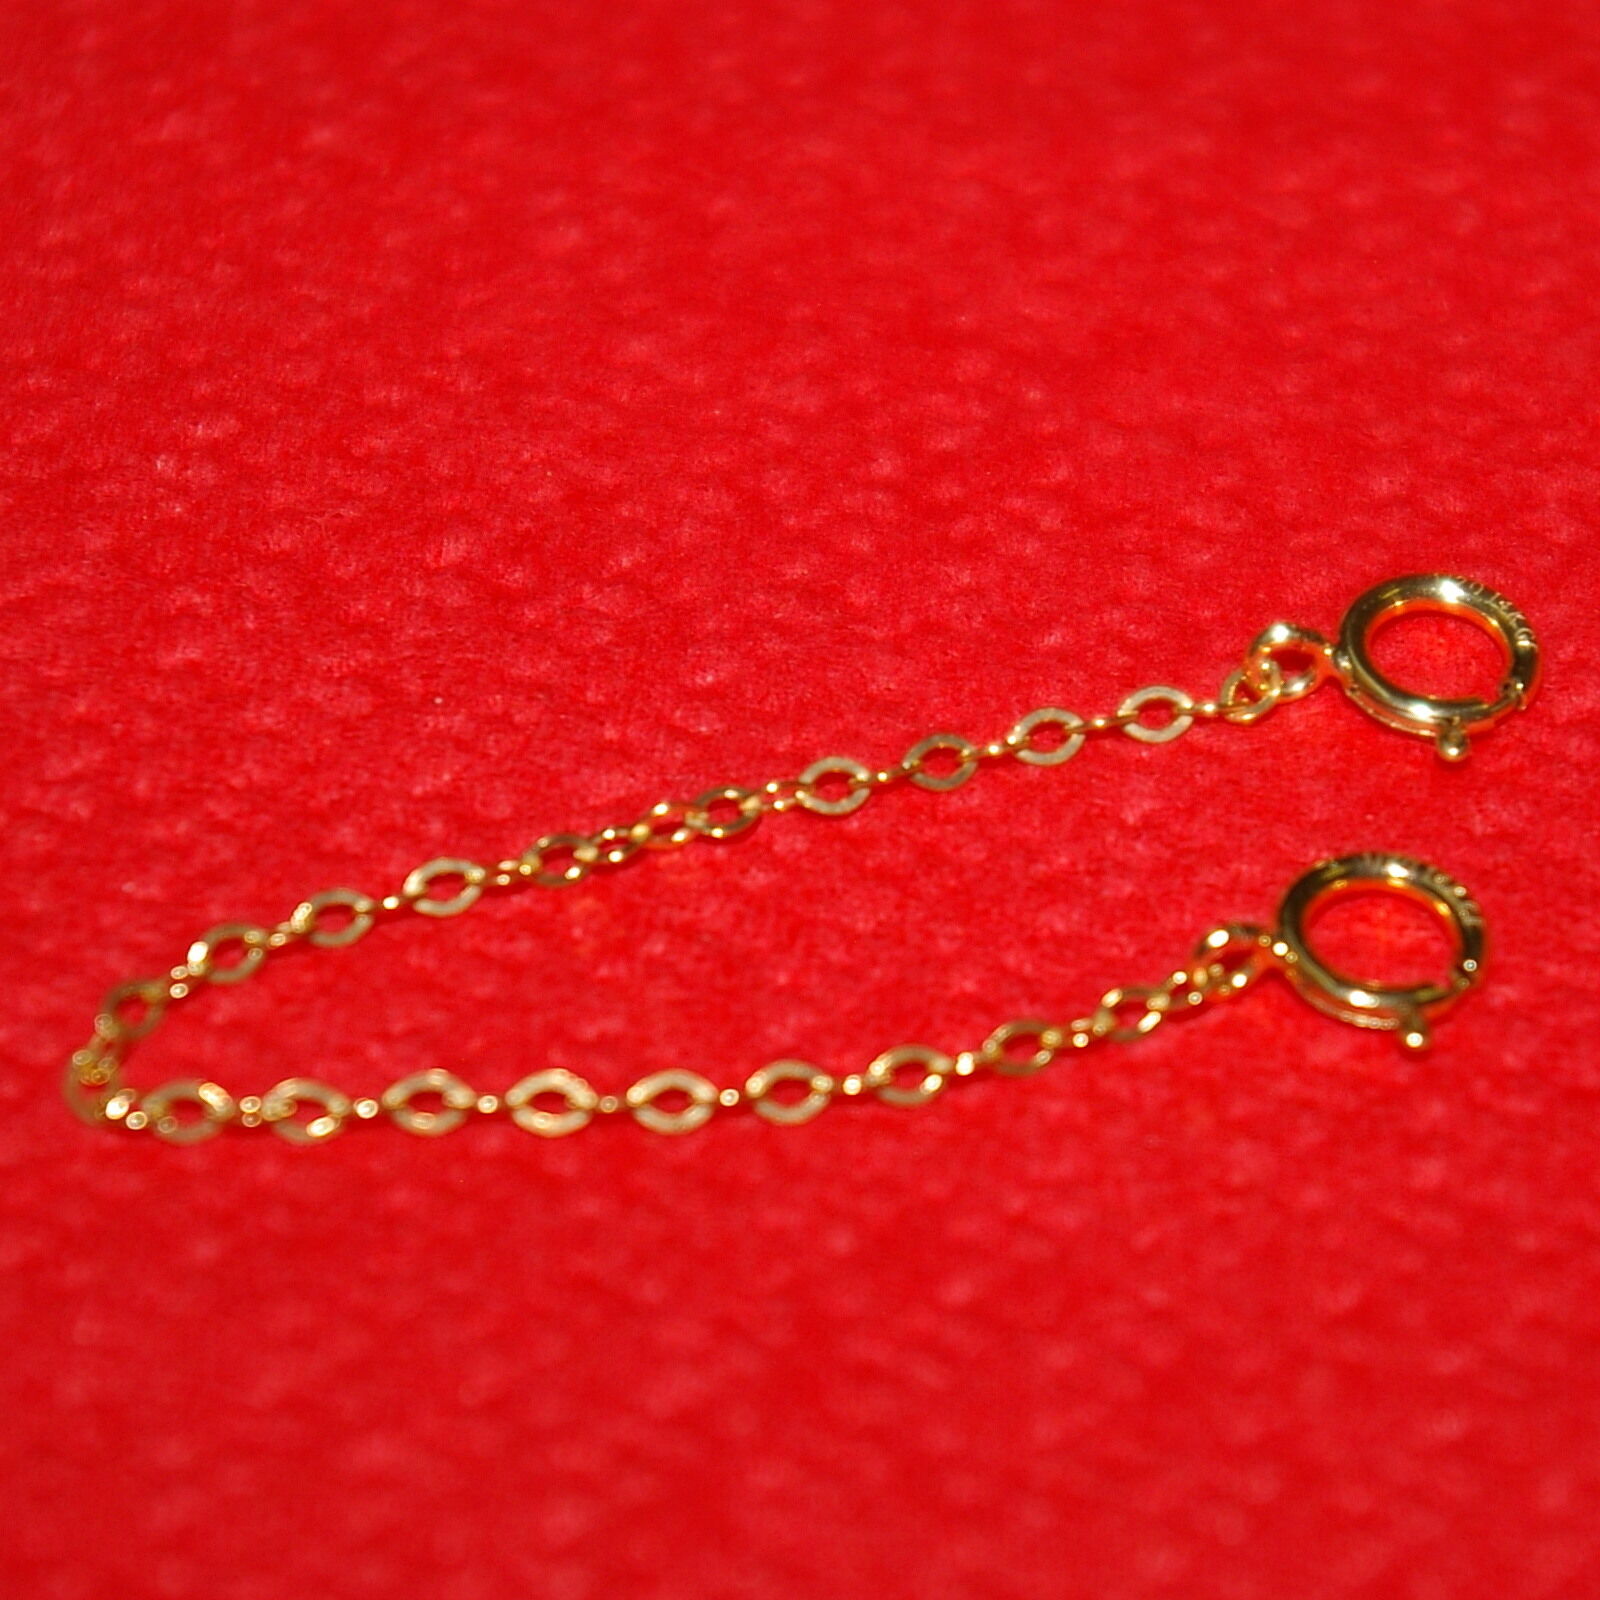 5 pcs 14kt GOLD FILLED 1.5x2mm Flat Cable Chain EXTENDERS with Two Spring Clasps BalliSilver - фотография #6